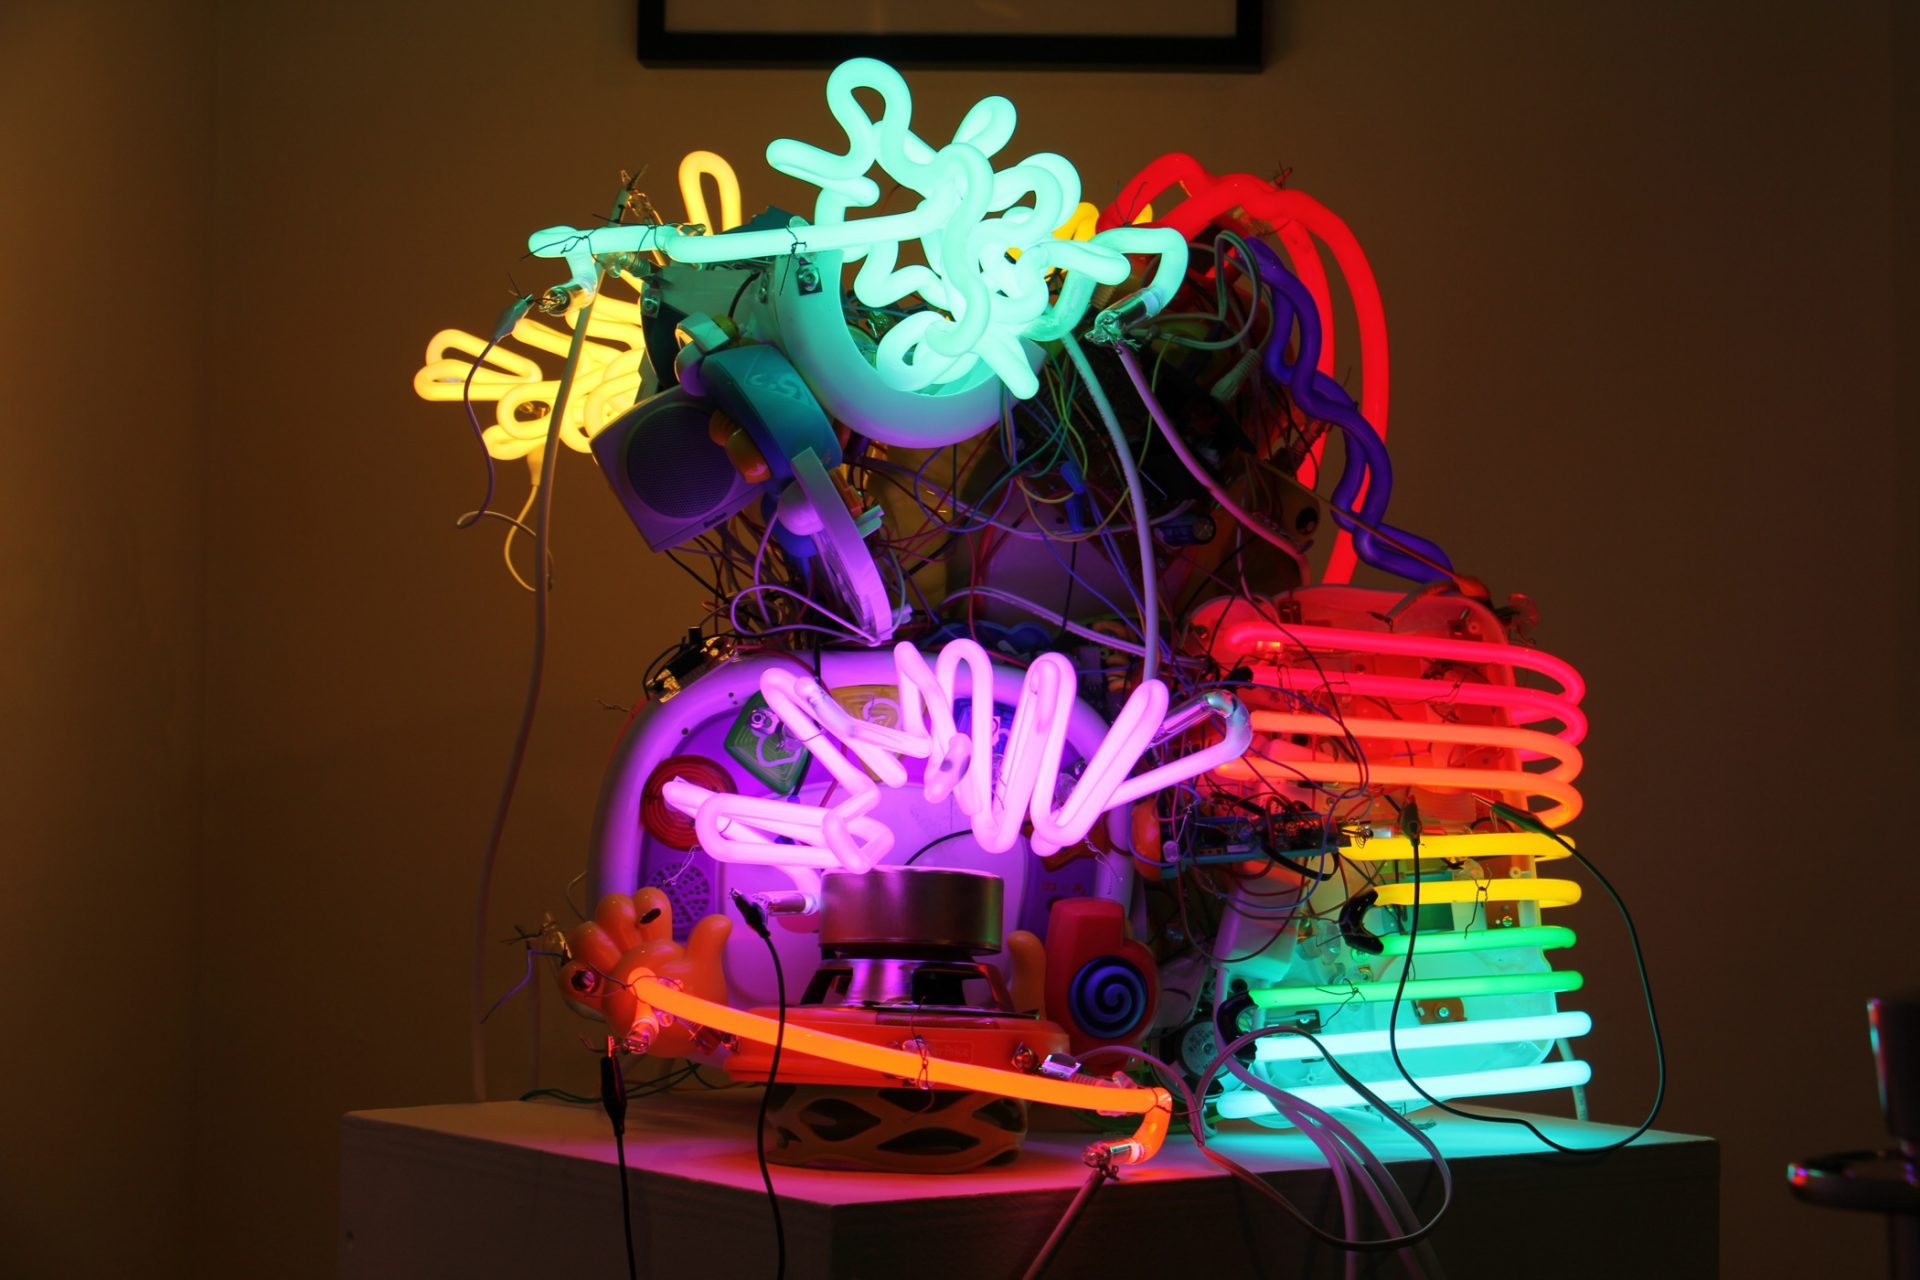 James Akers created two neon sculptures for the show. 